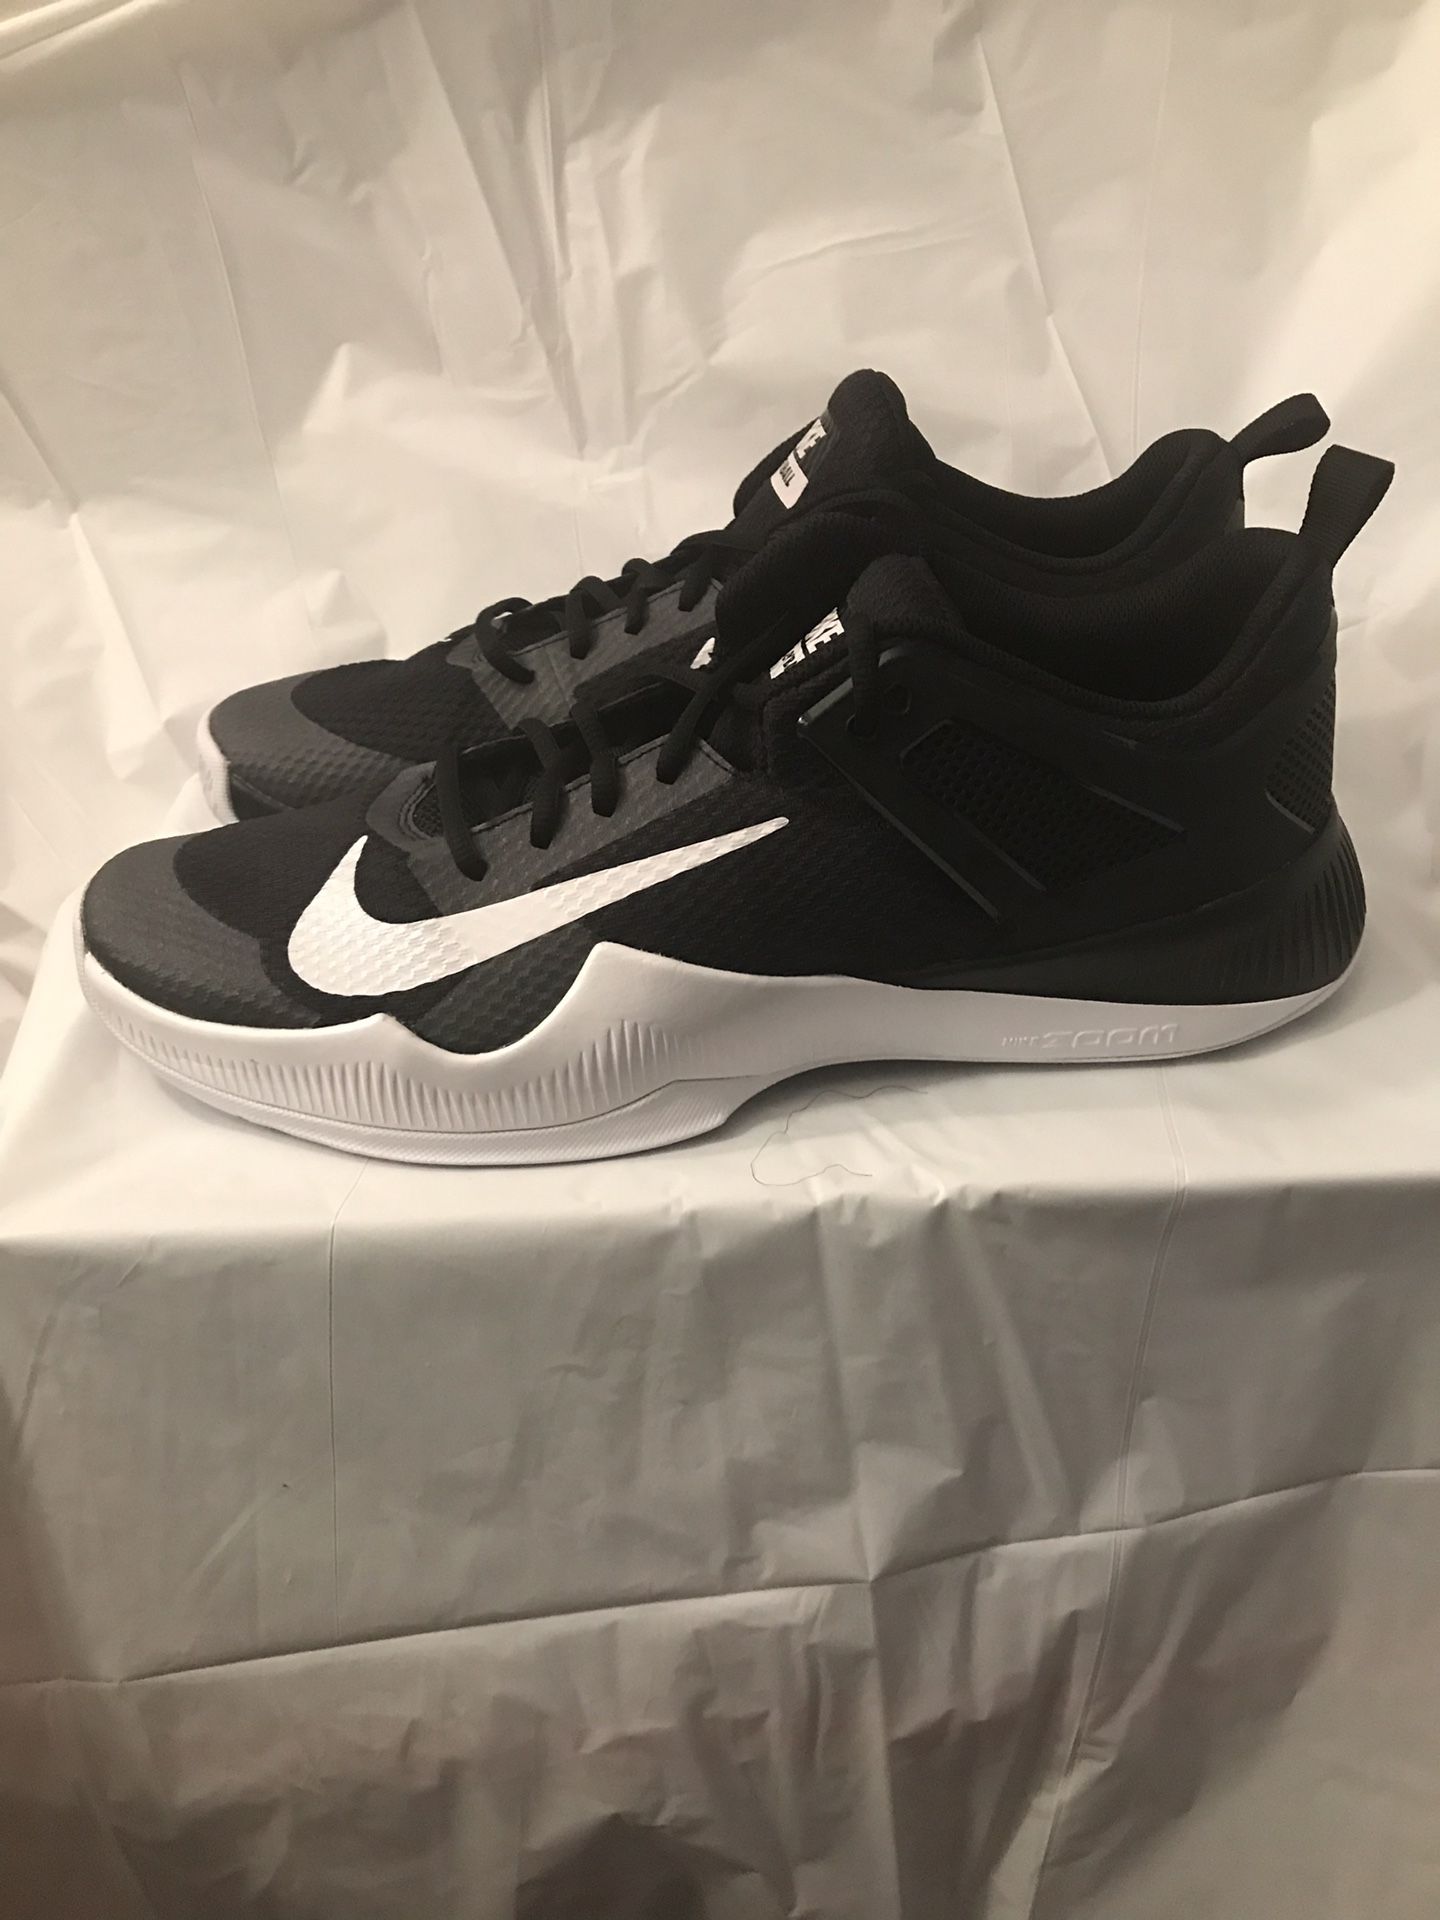 Women’s Nike Air Zoom HyperAce Volleyball Shoes Size 15